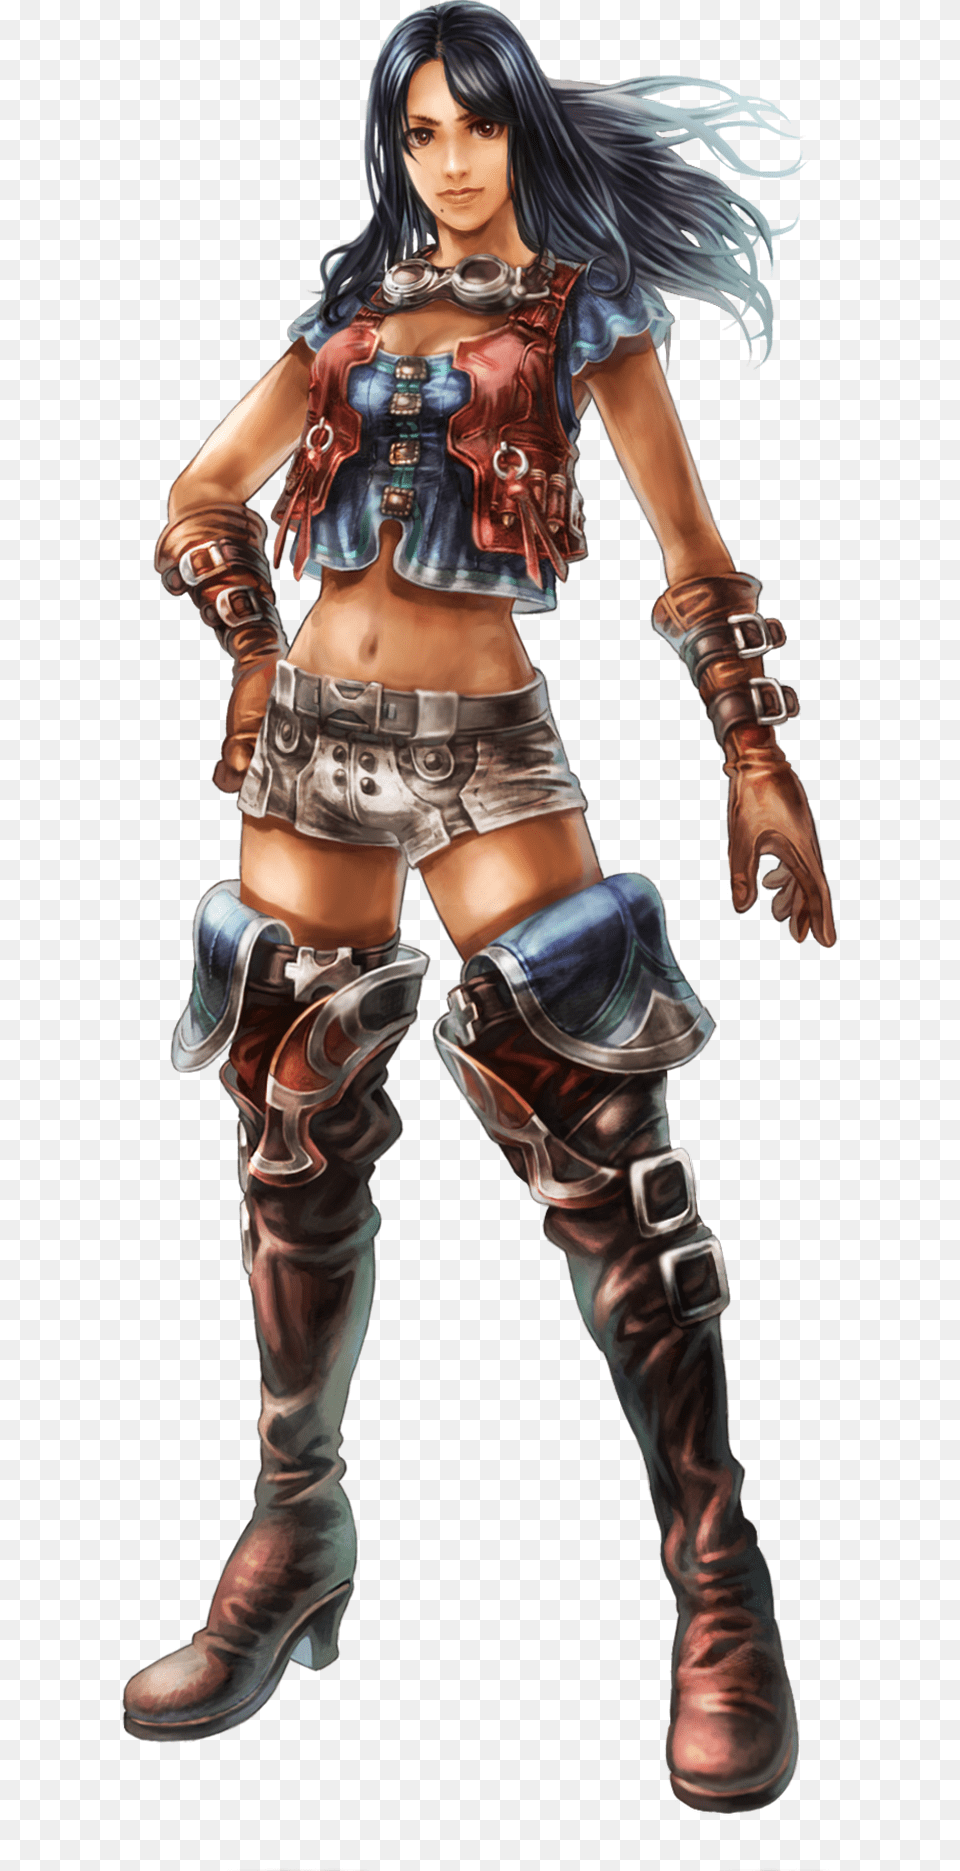 Official Artwork Of Sharla From Xenoblade Chronicles Sharla Xenoblade, Book, Publication, Comics, Adult Png Image